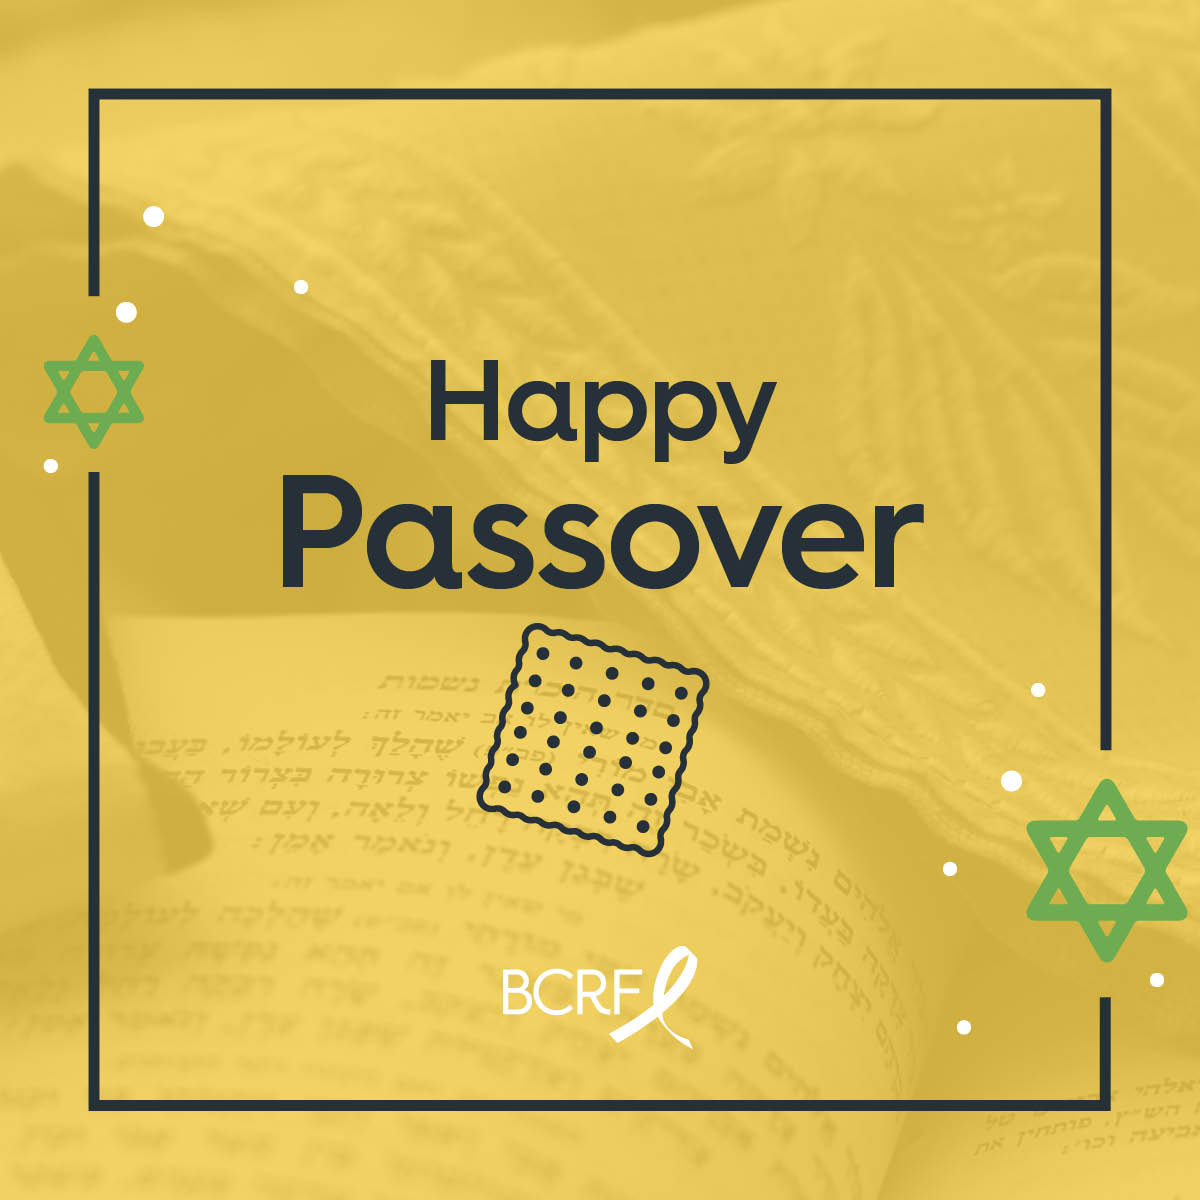 Wishing all who celebrate a happy Passover! May this special day be blessed with joy and happiness for you and your family.